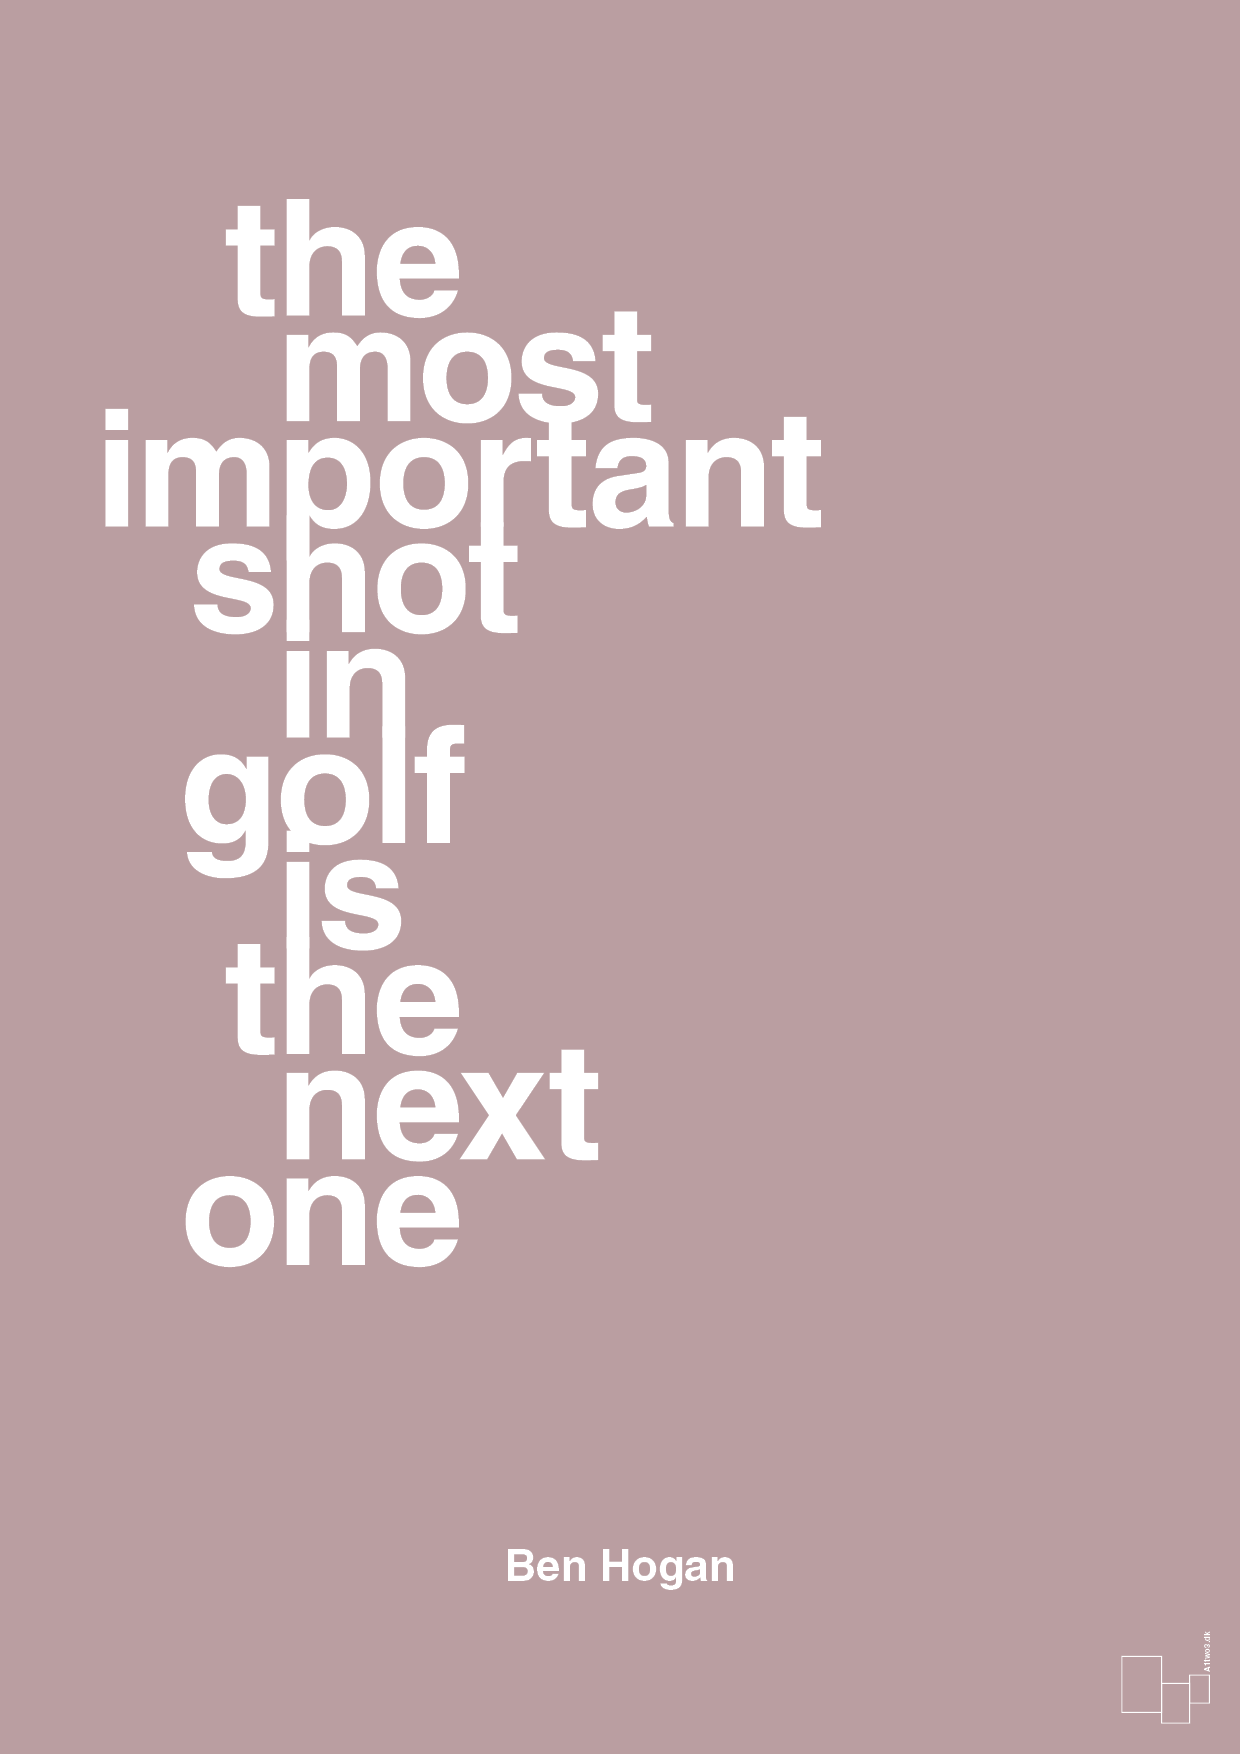 the most important shot in golf is the next one - Plakat med Citater i Light Rose